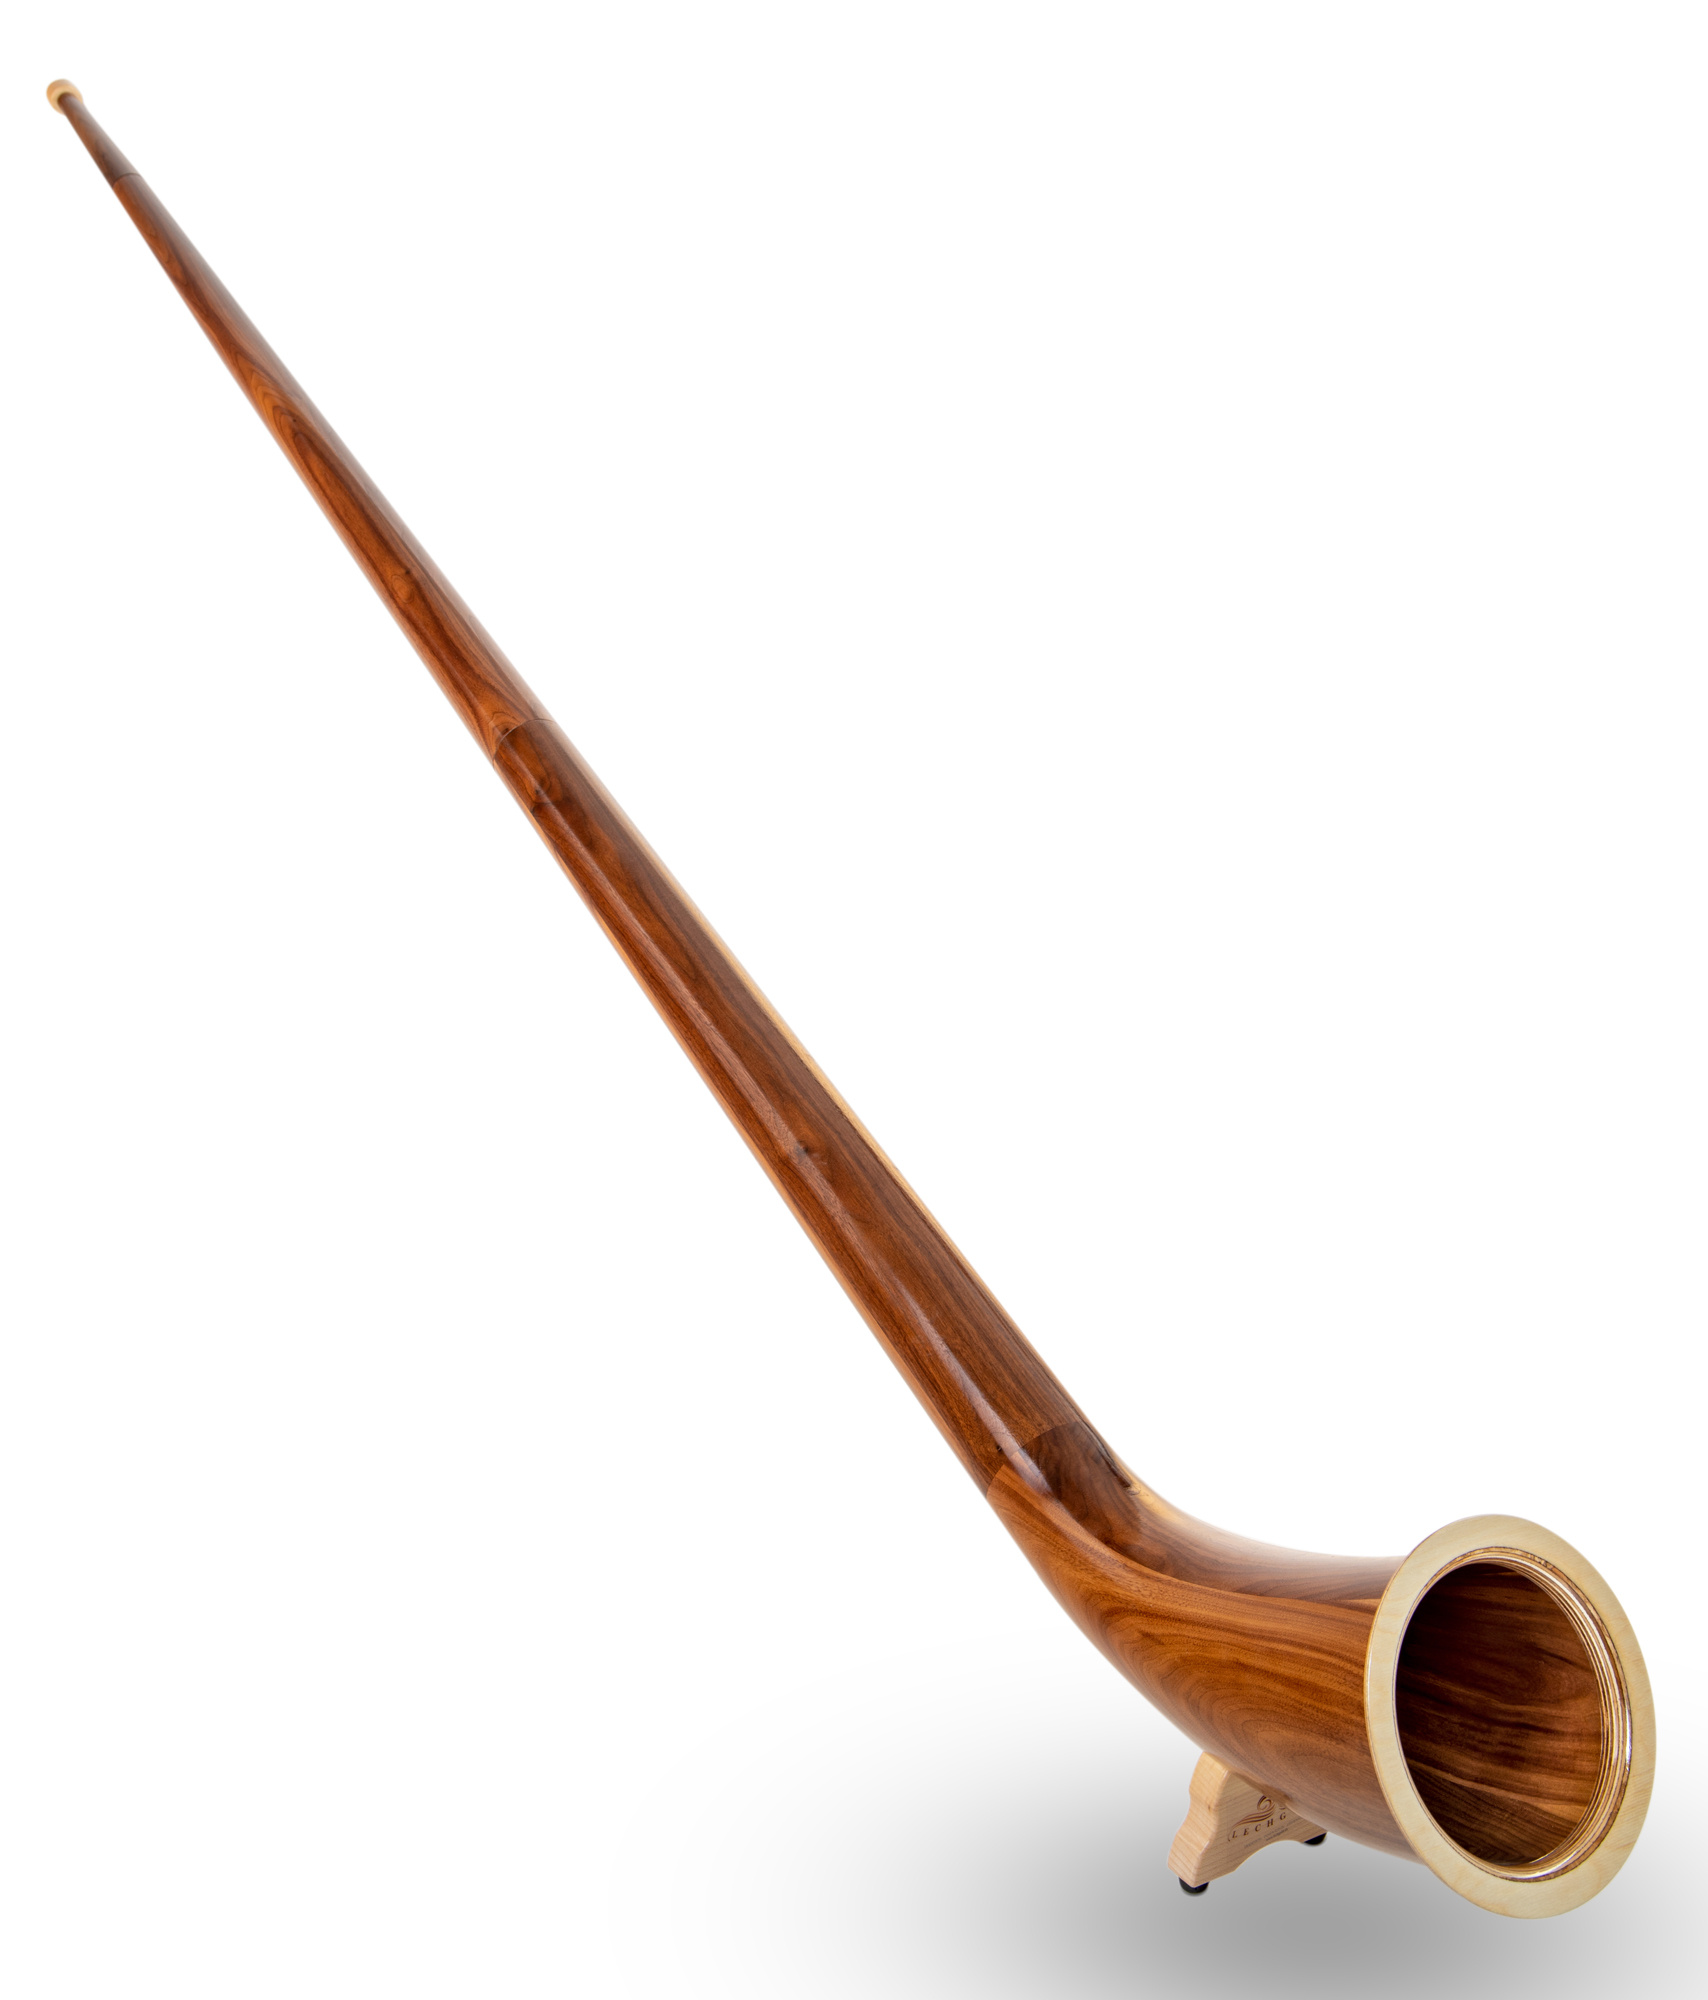 Alphorn: A Lechgold wind instrument, Traditional craftsmanship, 3-piece Bb horn, 275 cm, Made of nut and spruce. 1710x2000 HD Background.